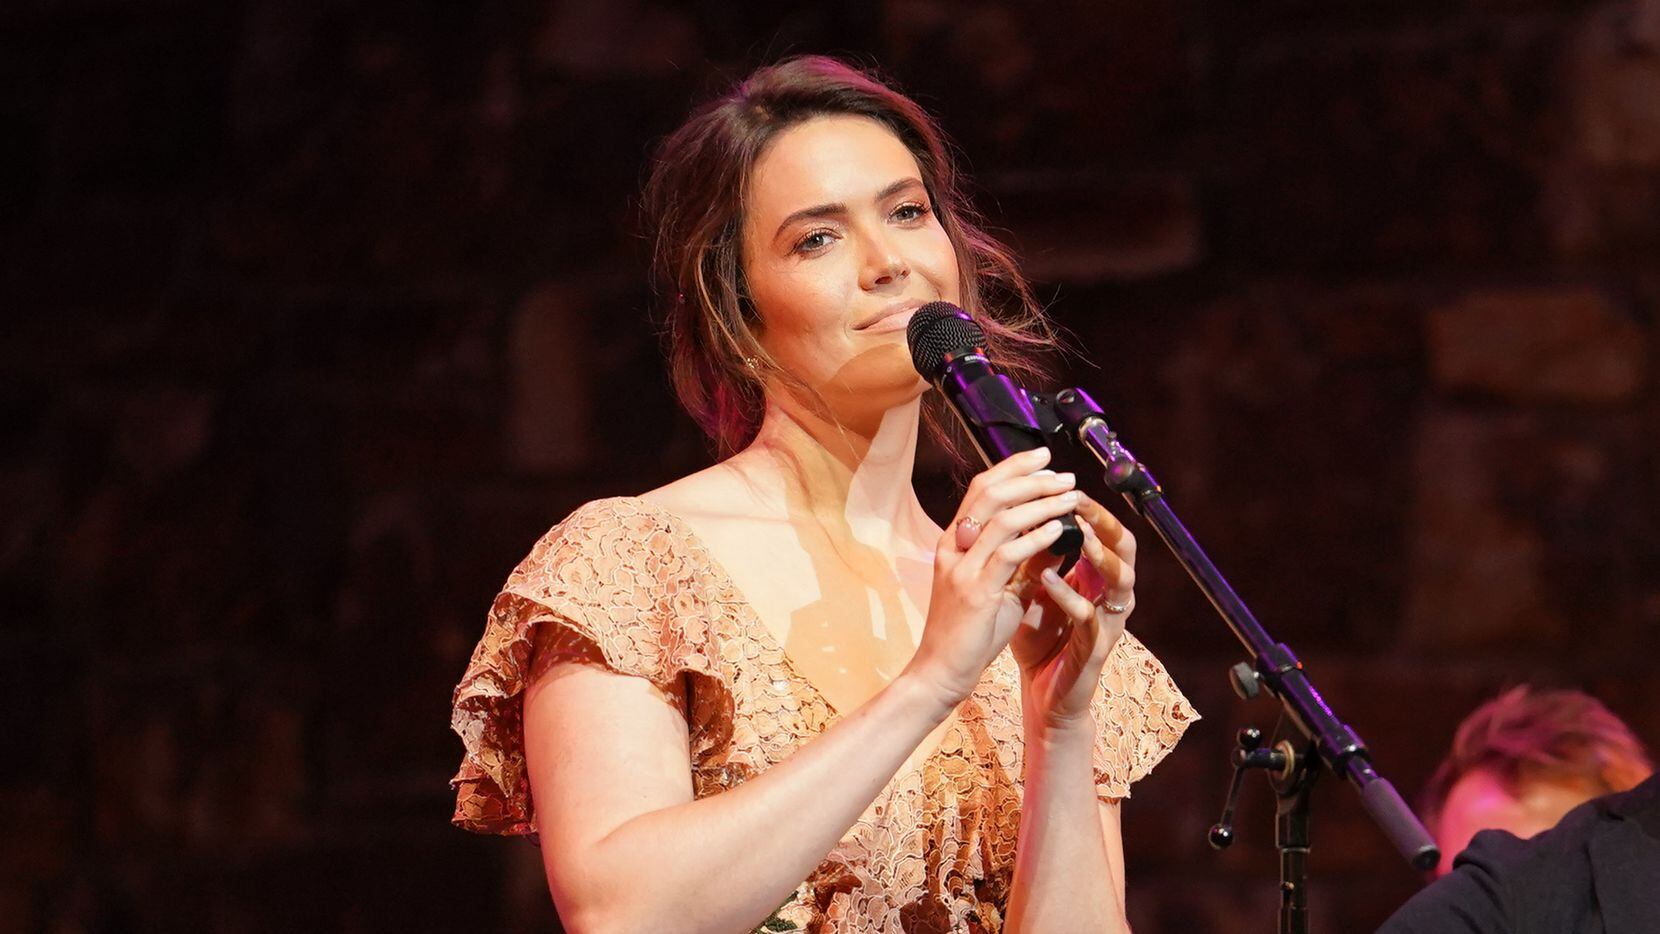 Mandy Moore has canceled her tour, which included a July 6 stop at Strauss Square in Dallas,...